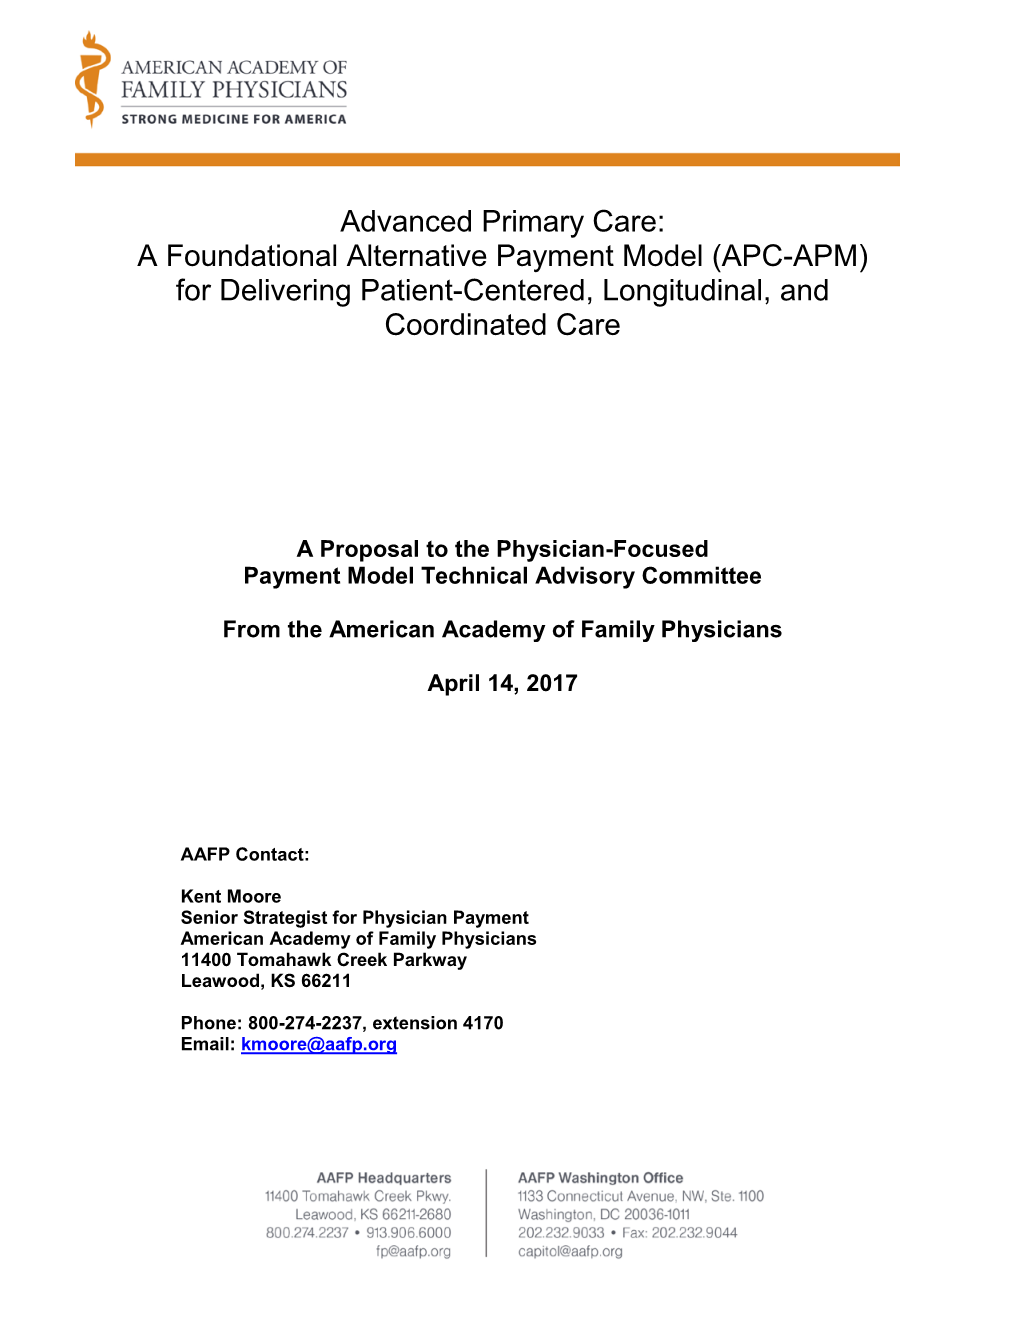 (APC- APM) for Delivering Patient-Centered, Longitudinal, and Coordinated Care